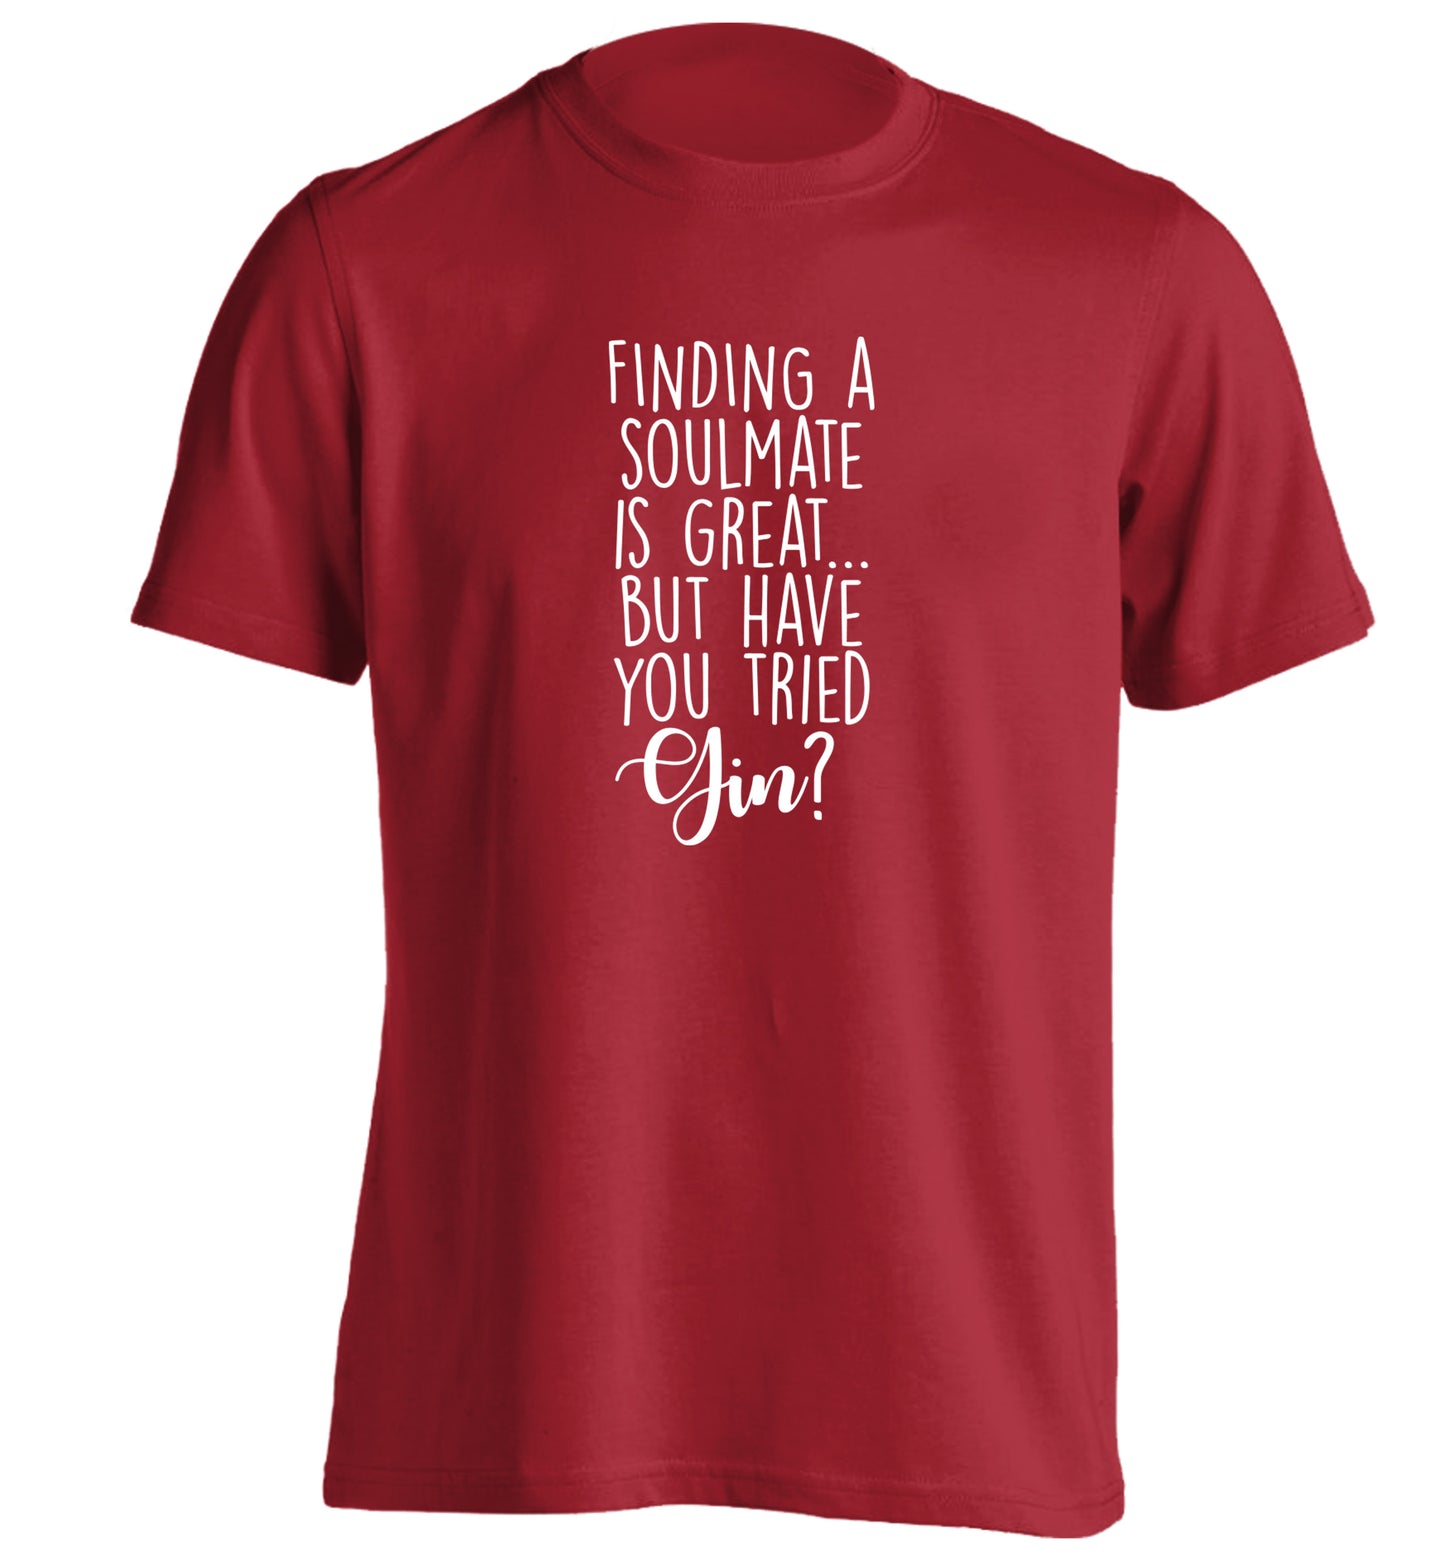 Finding a soulmate is great but have you tried gin? adults unisex red Tshirt 2XL